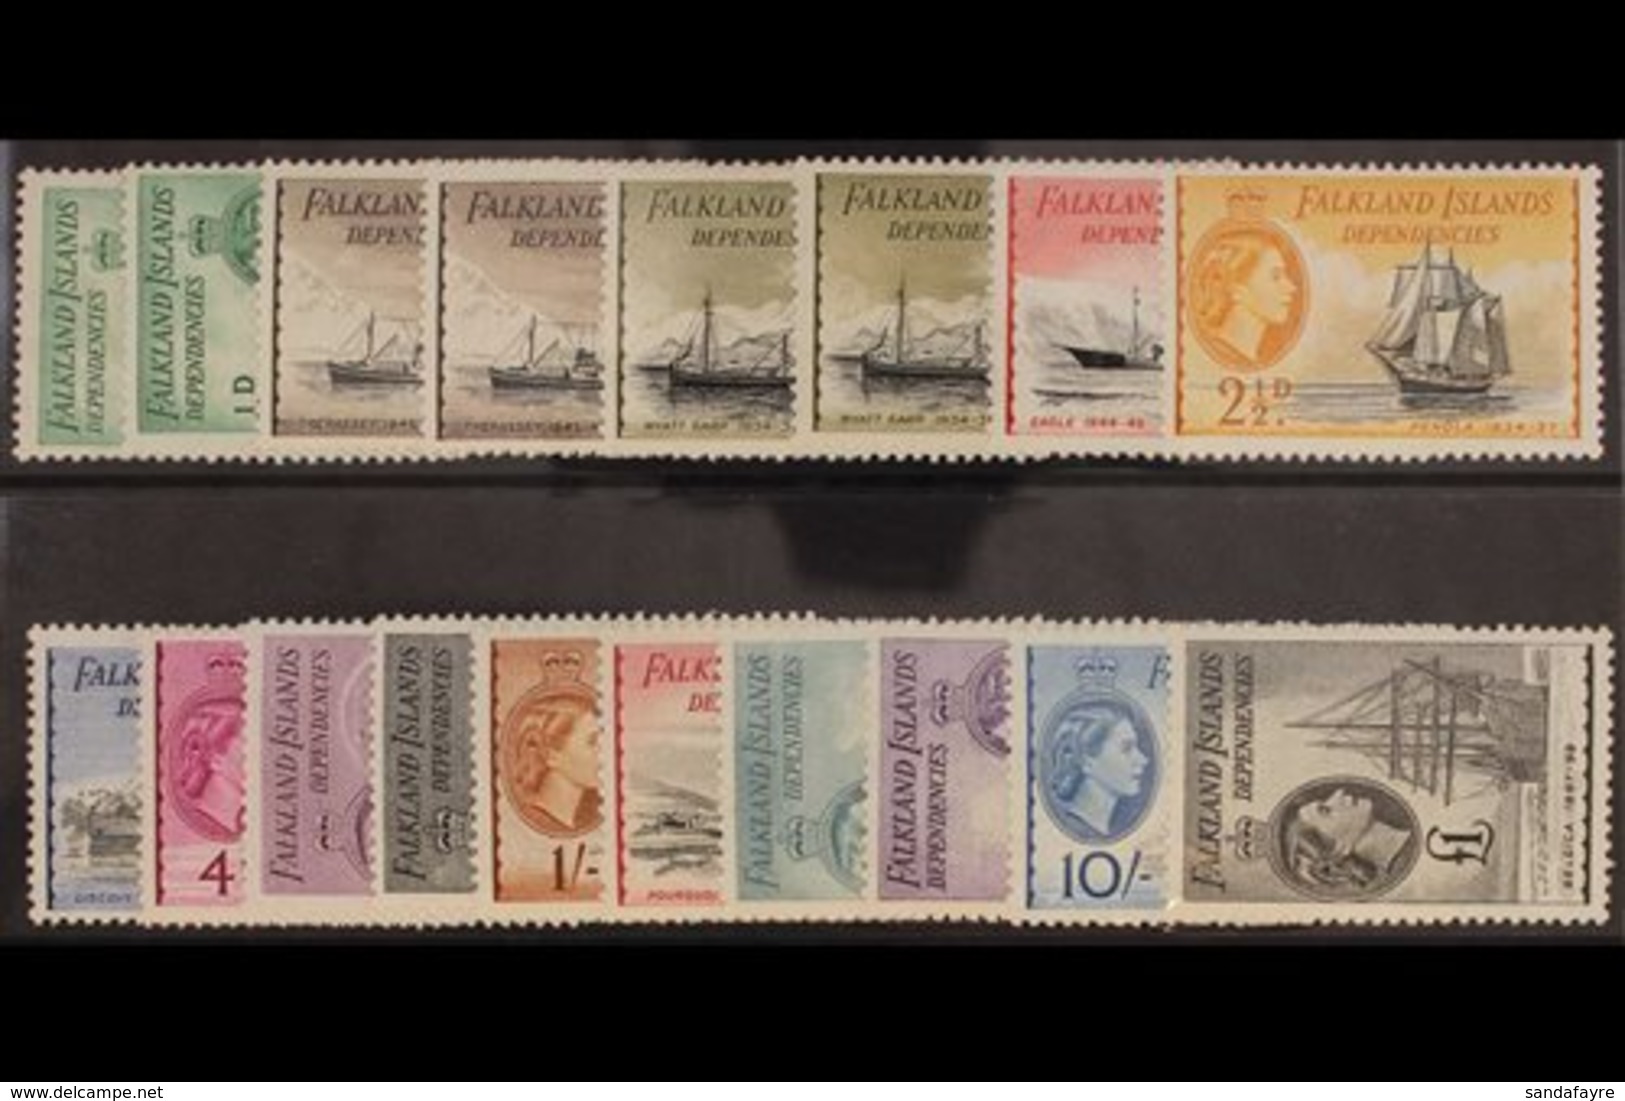 1954  Complete Set Including The DLR Printings,SG G26/40, G26a, 27b, 28a, Very Lighly Hinged Mint. (18 Stamps) For More  - Falkland Islands